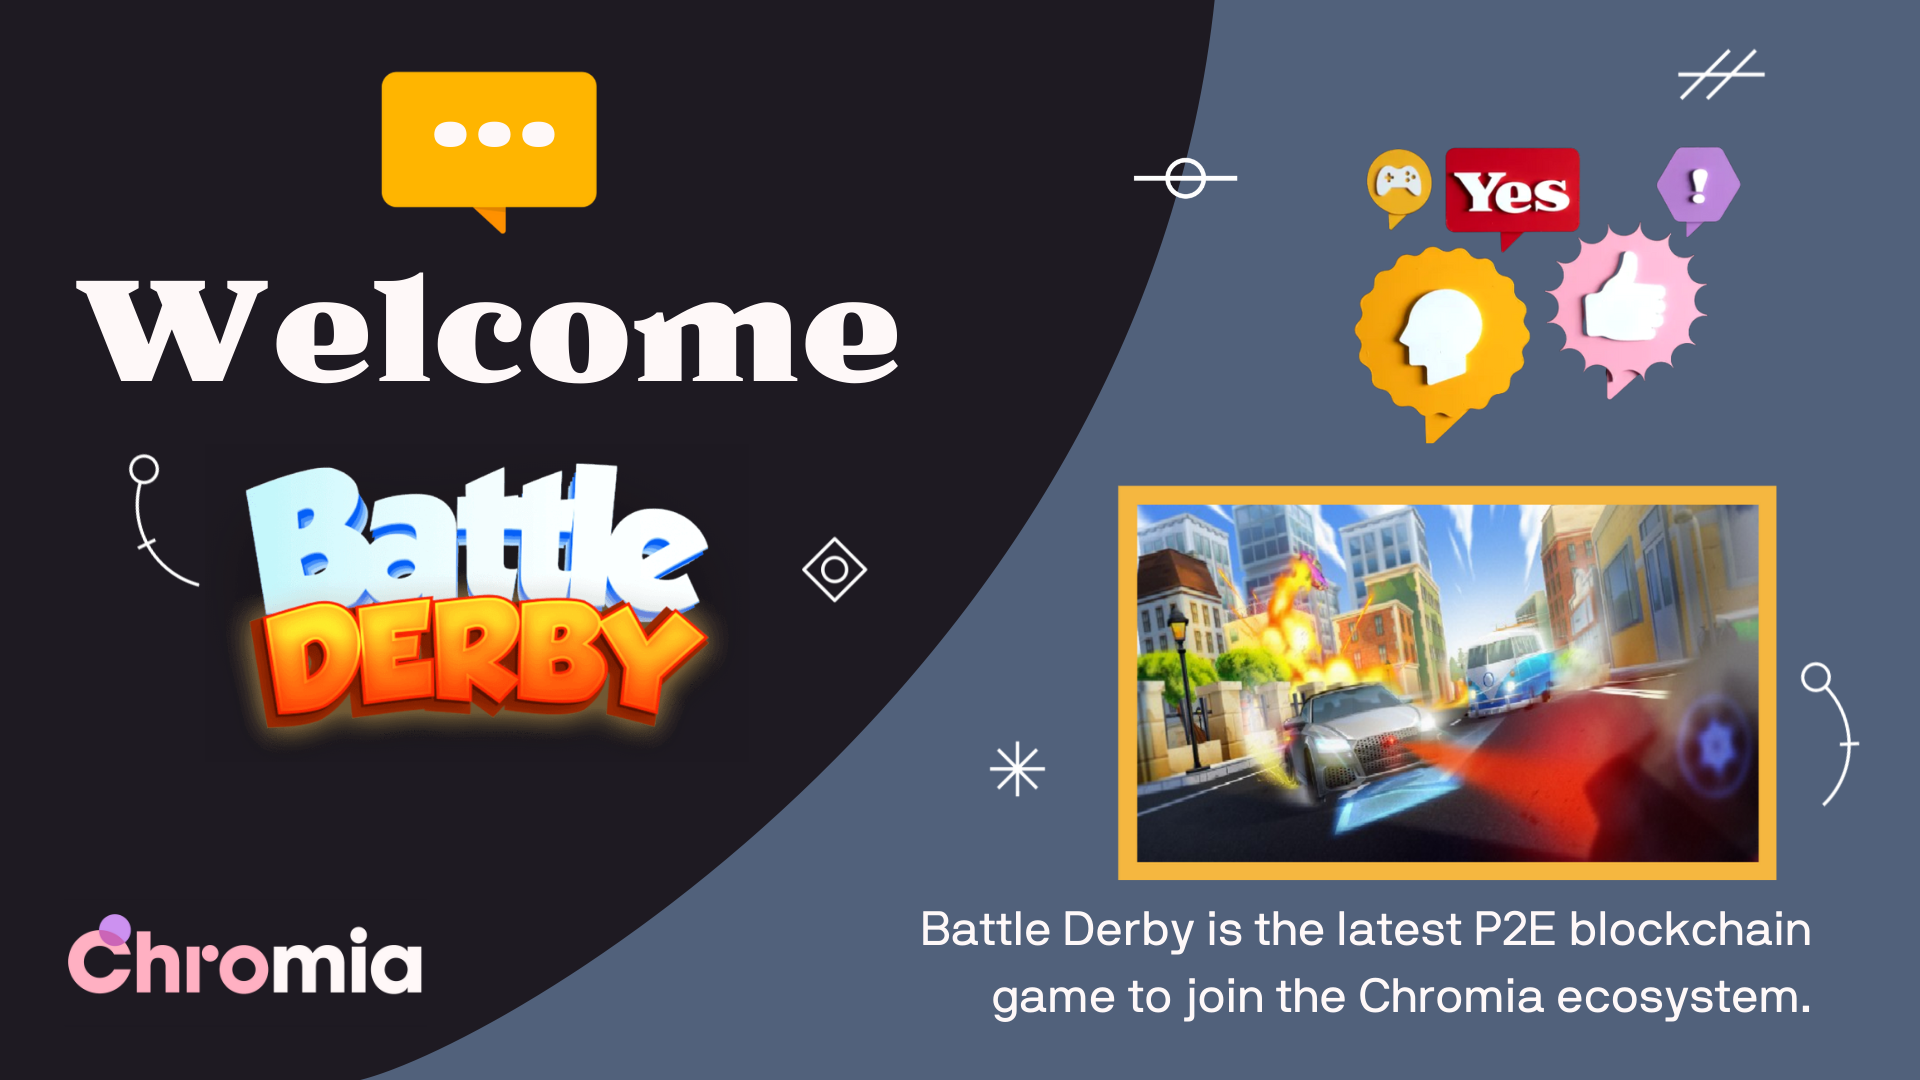 Battle Derby is the latest P2E blockchain game to join the Chromia ecosystem following high profile 1,8M USD private funding round